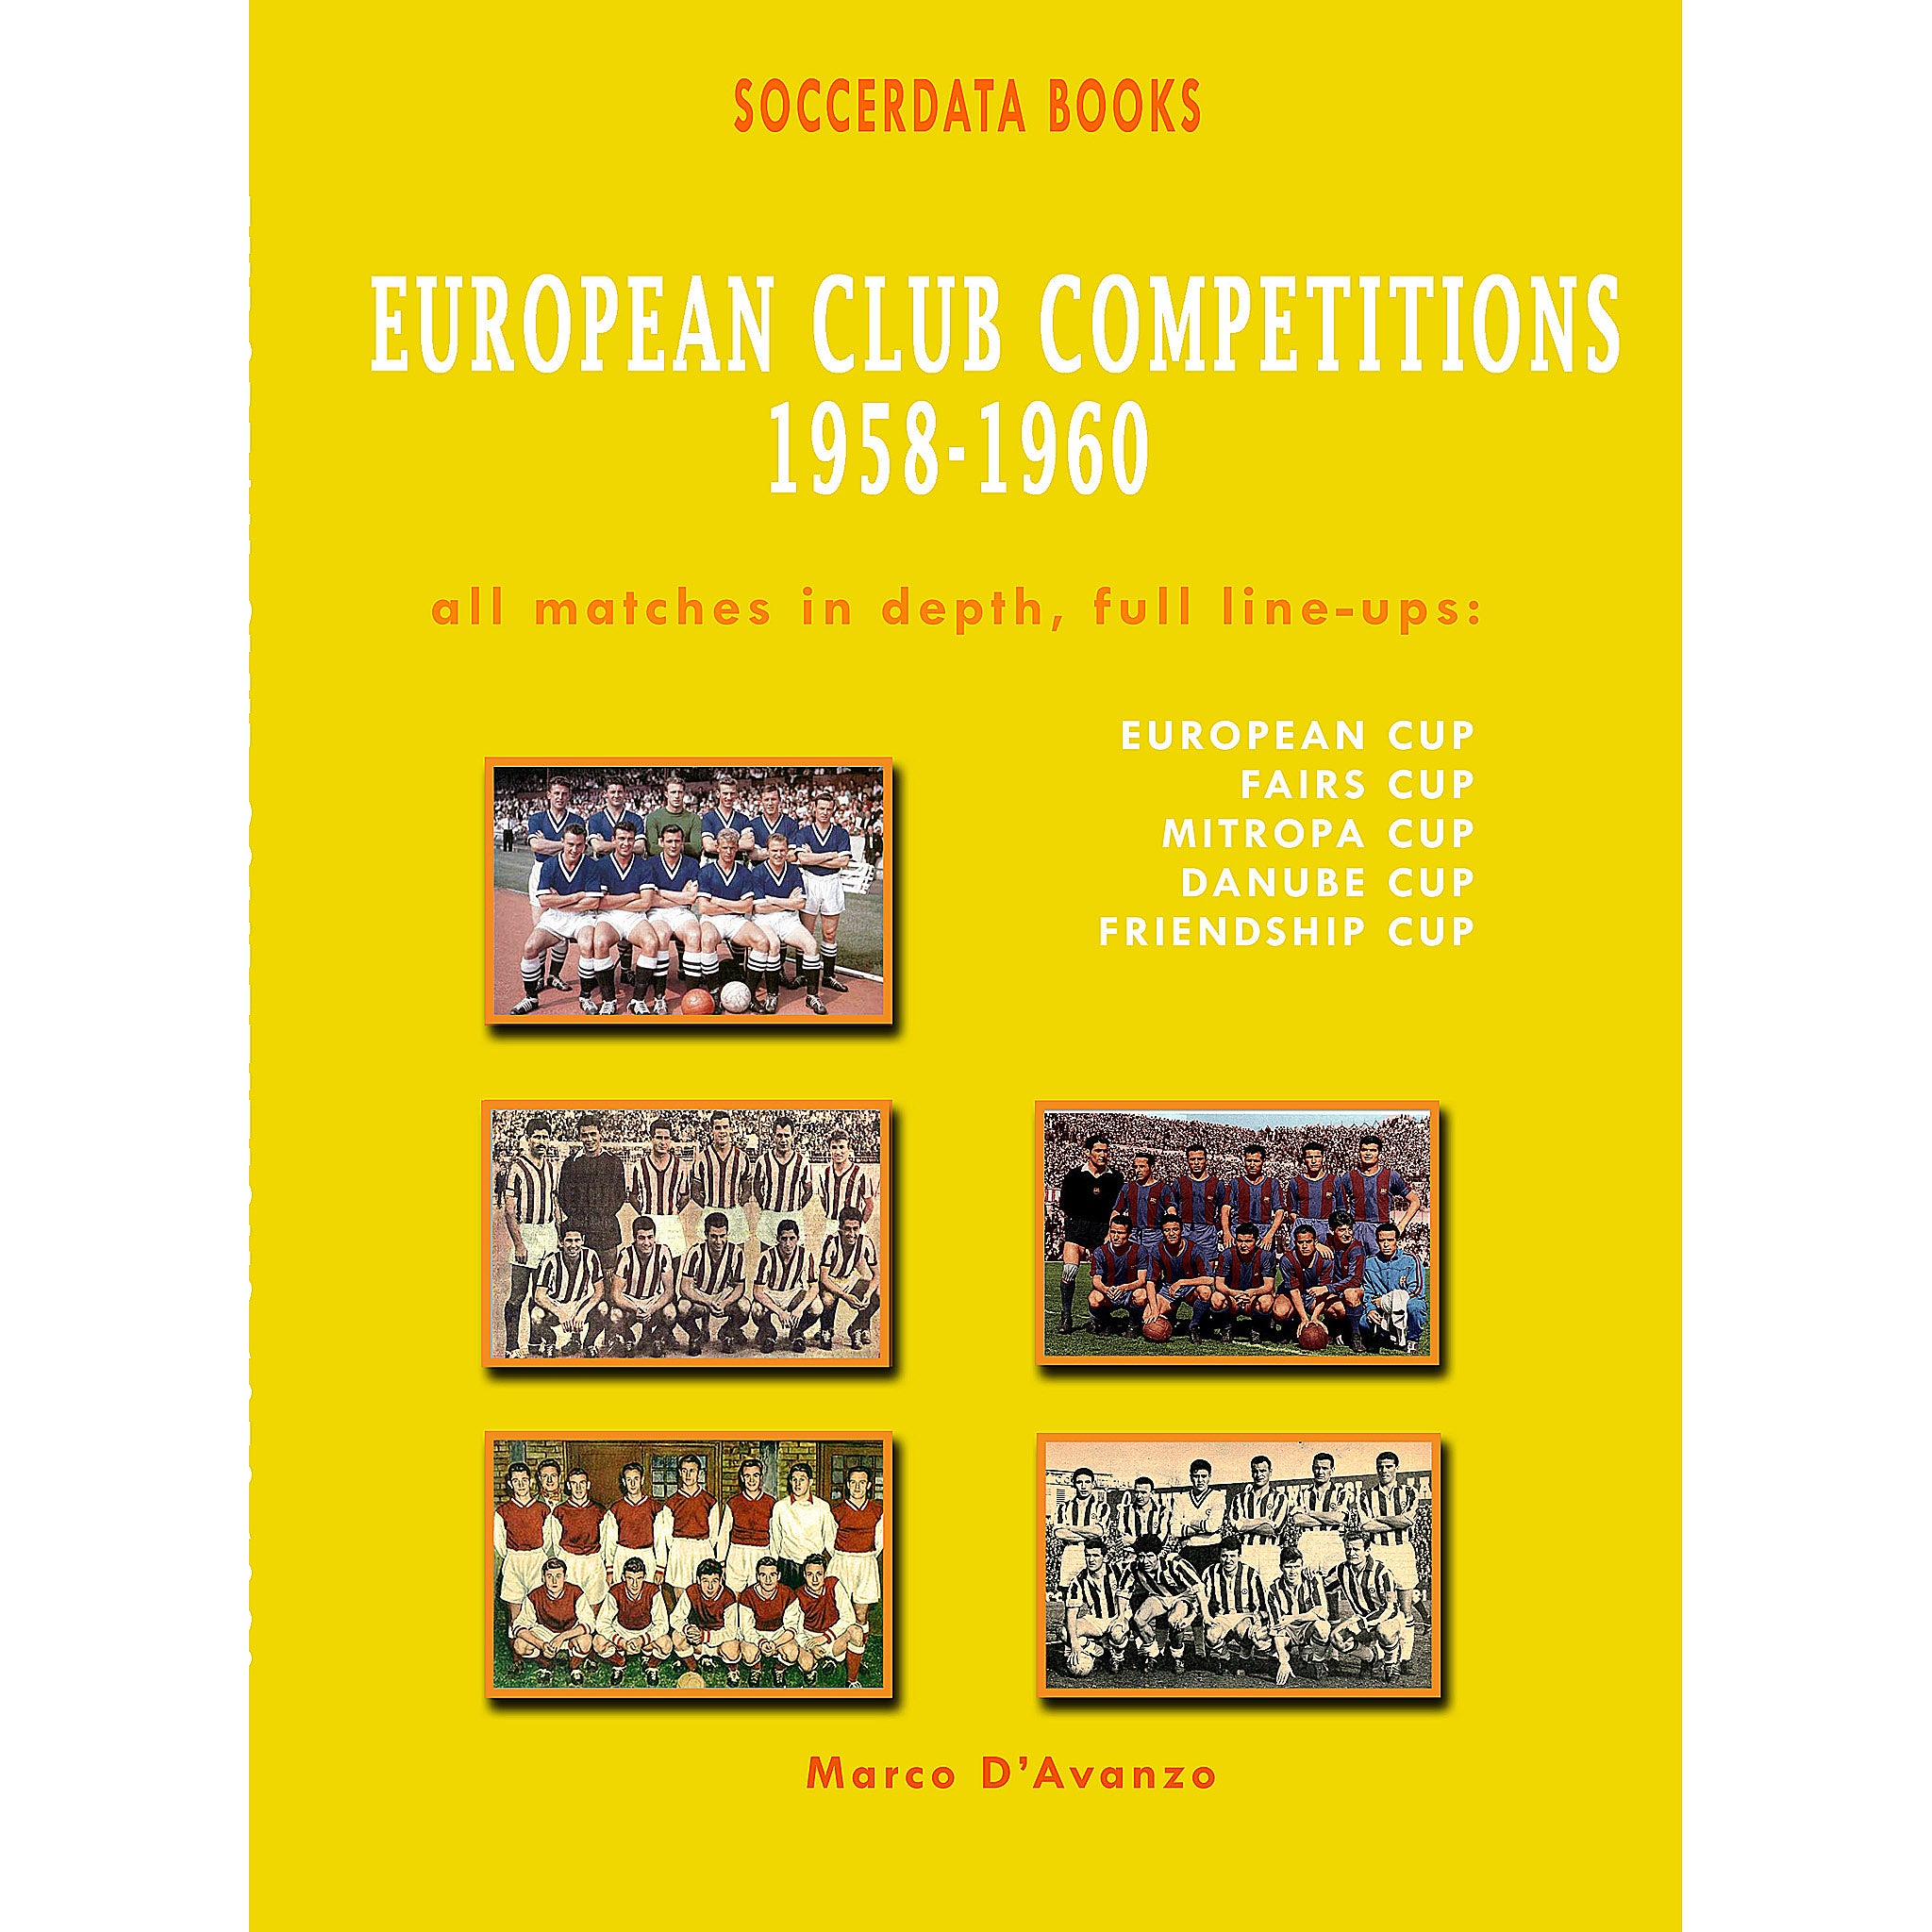 European Club Competitions 1958-1960